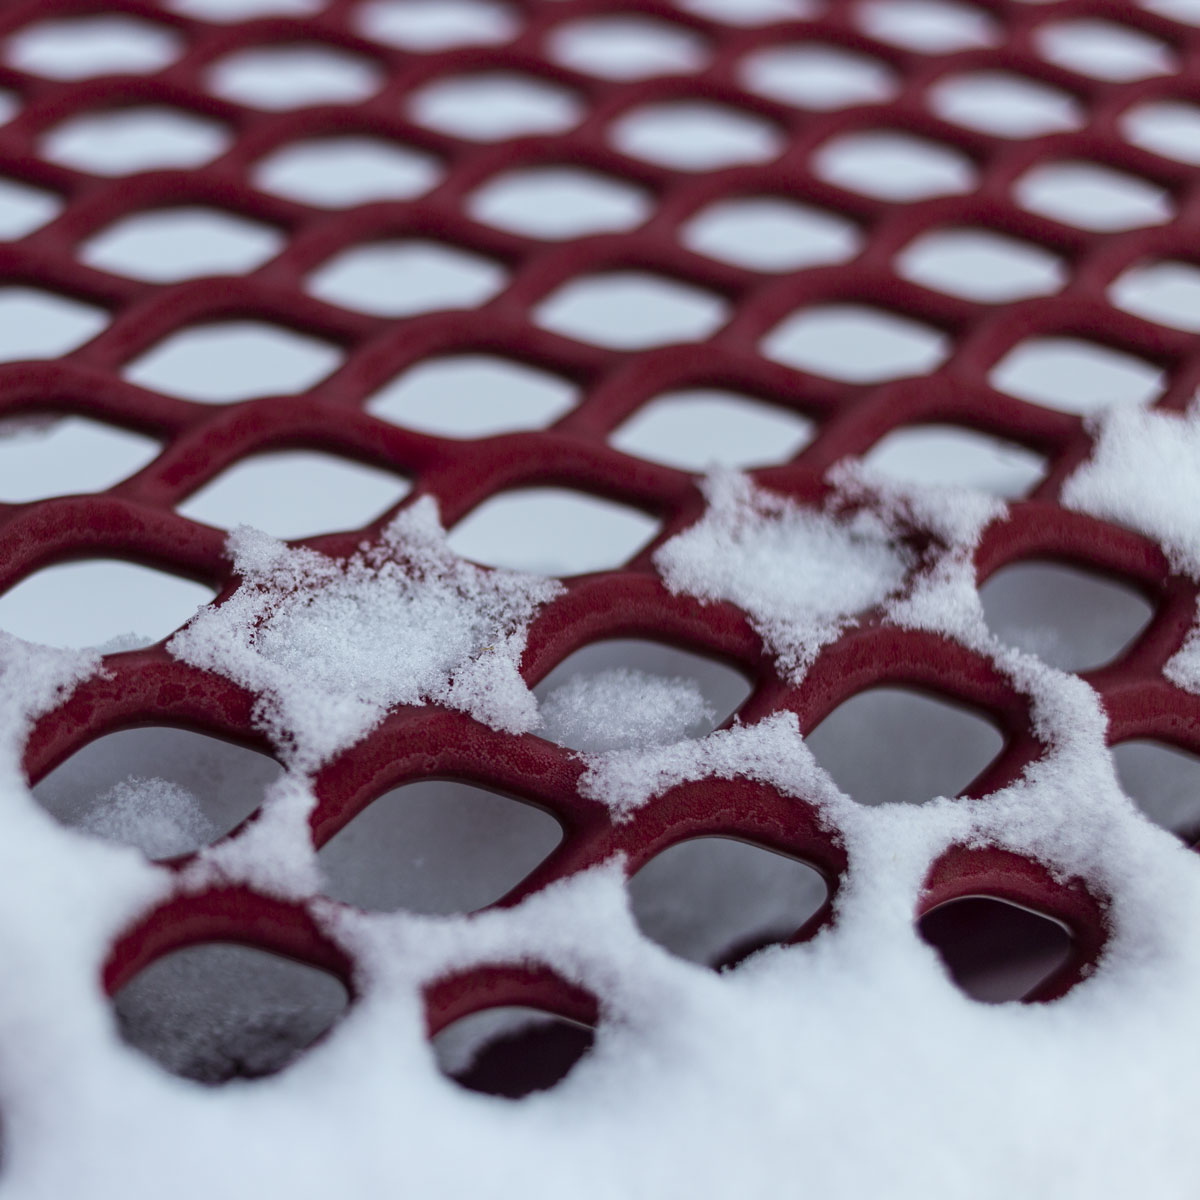 The main subject, a patch of star shaped snow on a park bench,is isolated using background blur.